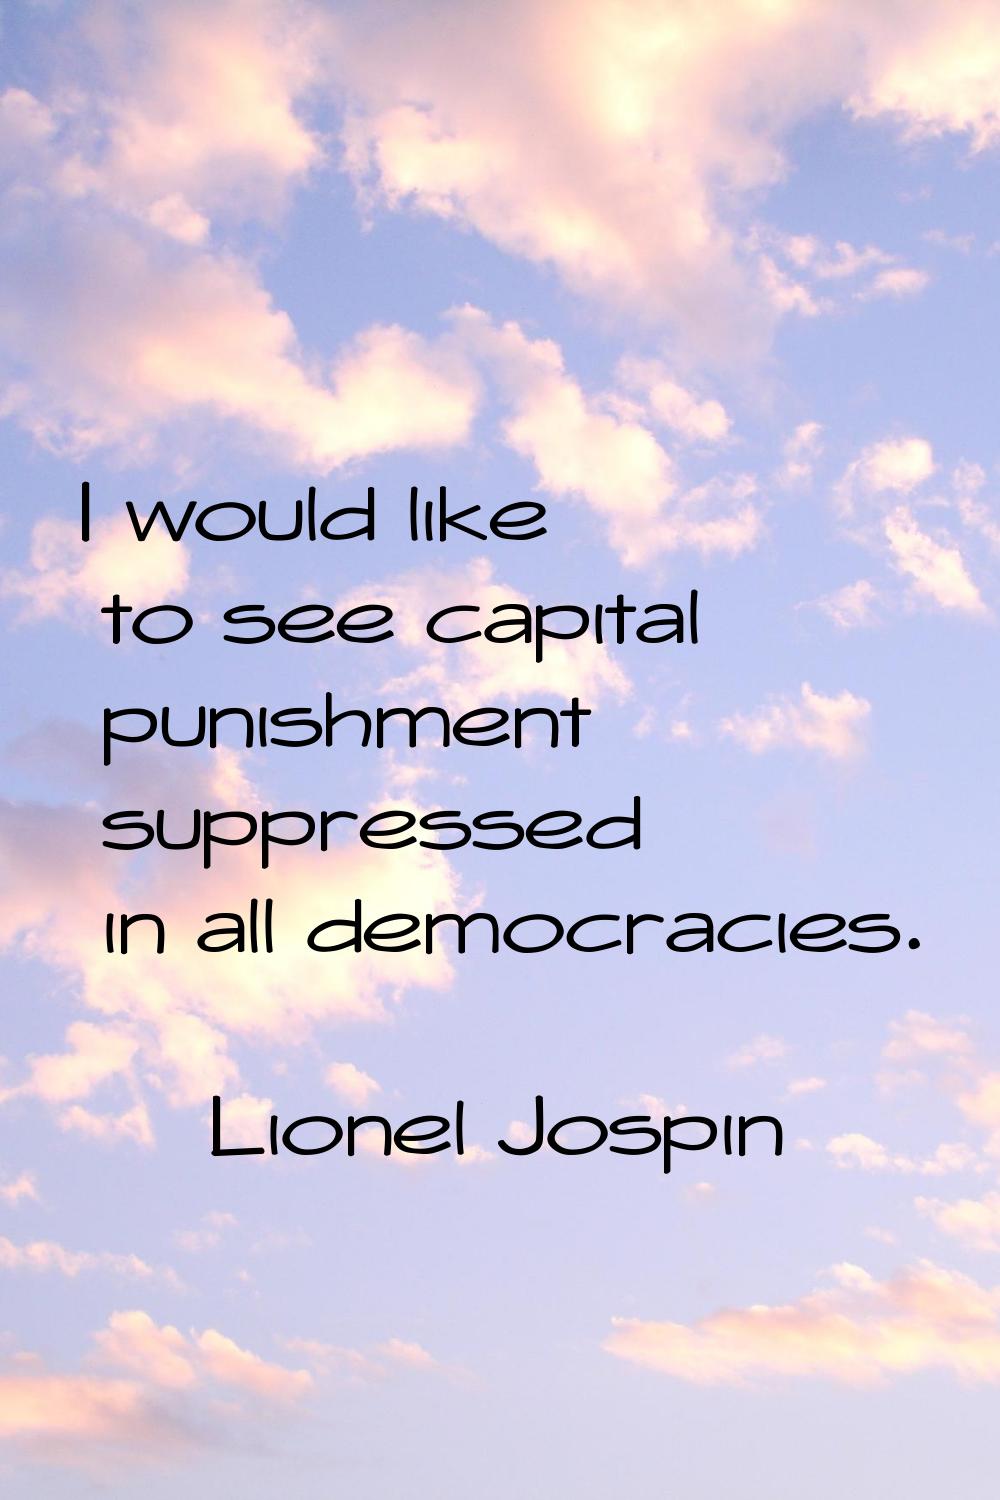 I would like to see capital punishment suppressed in all democracies.